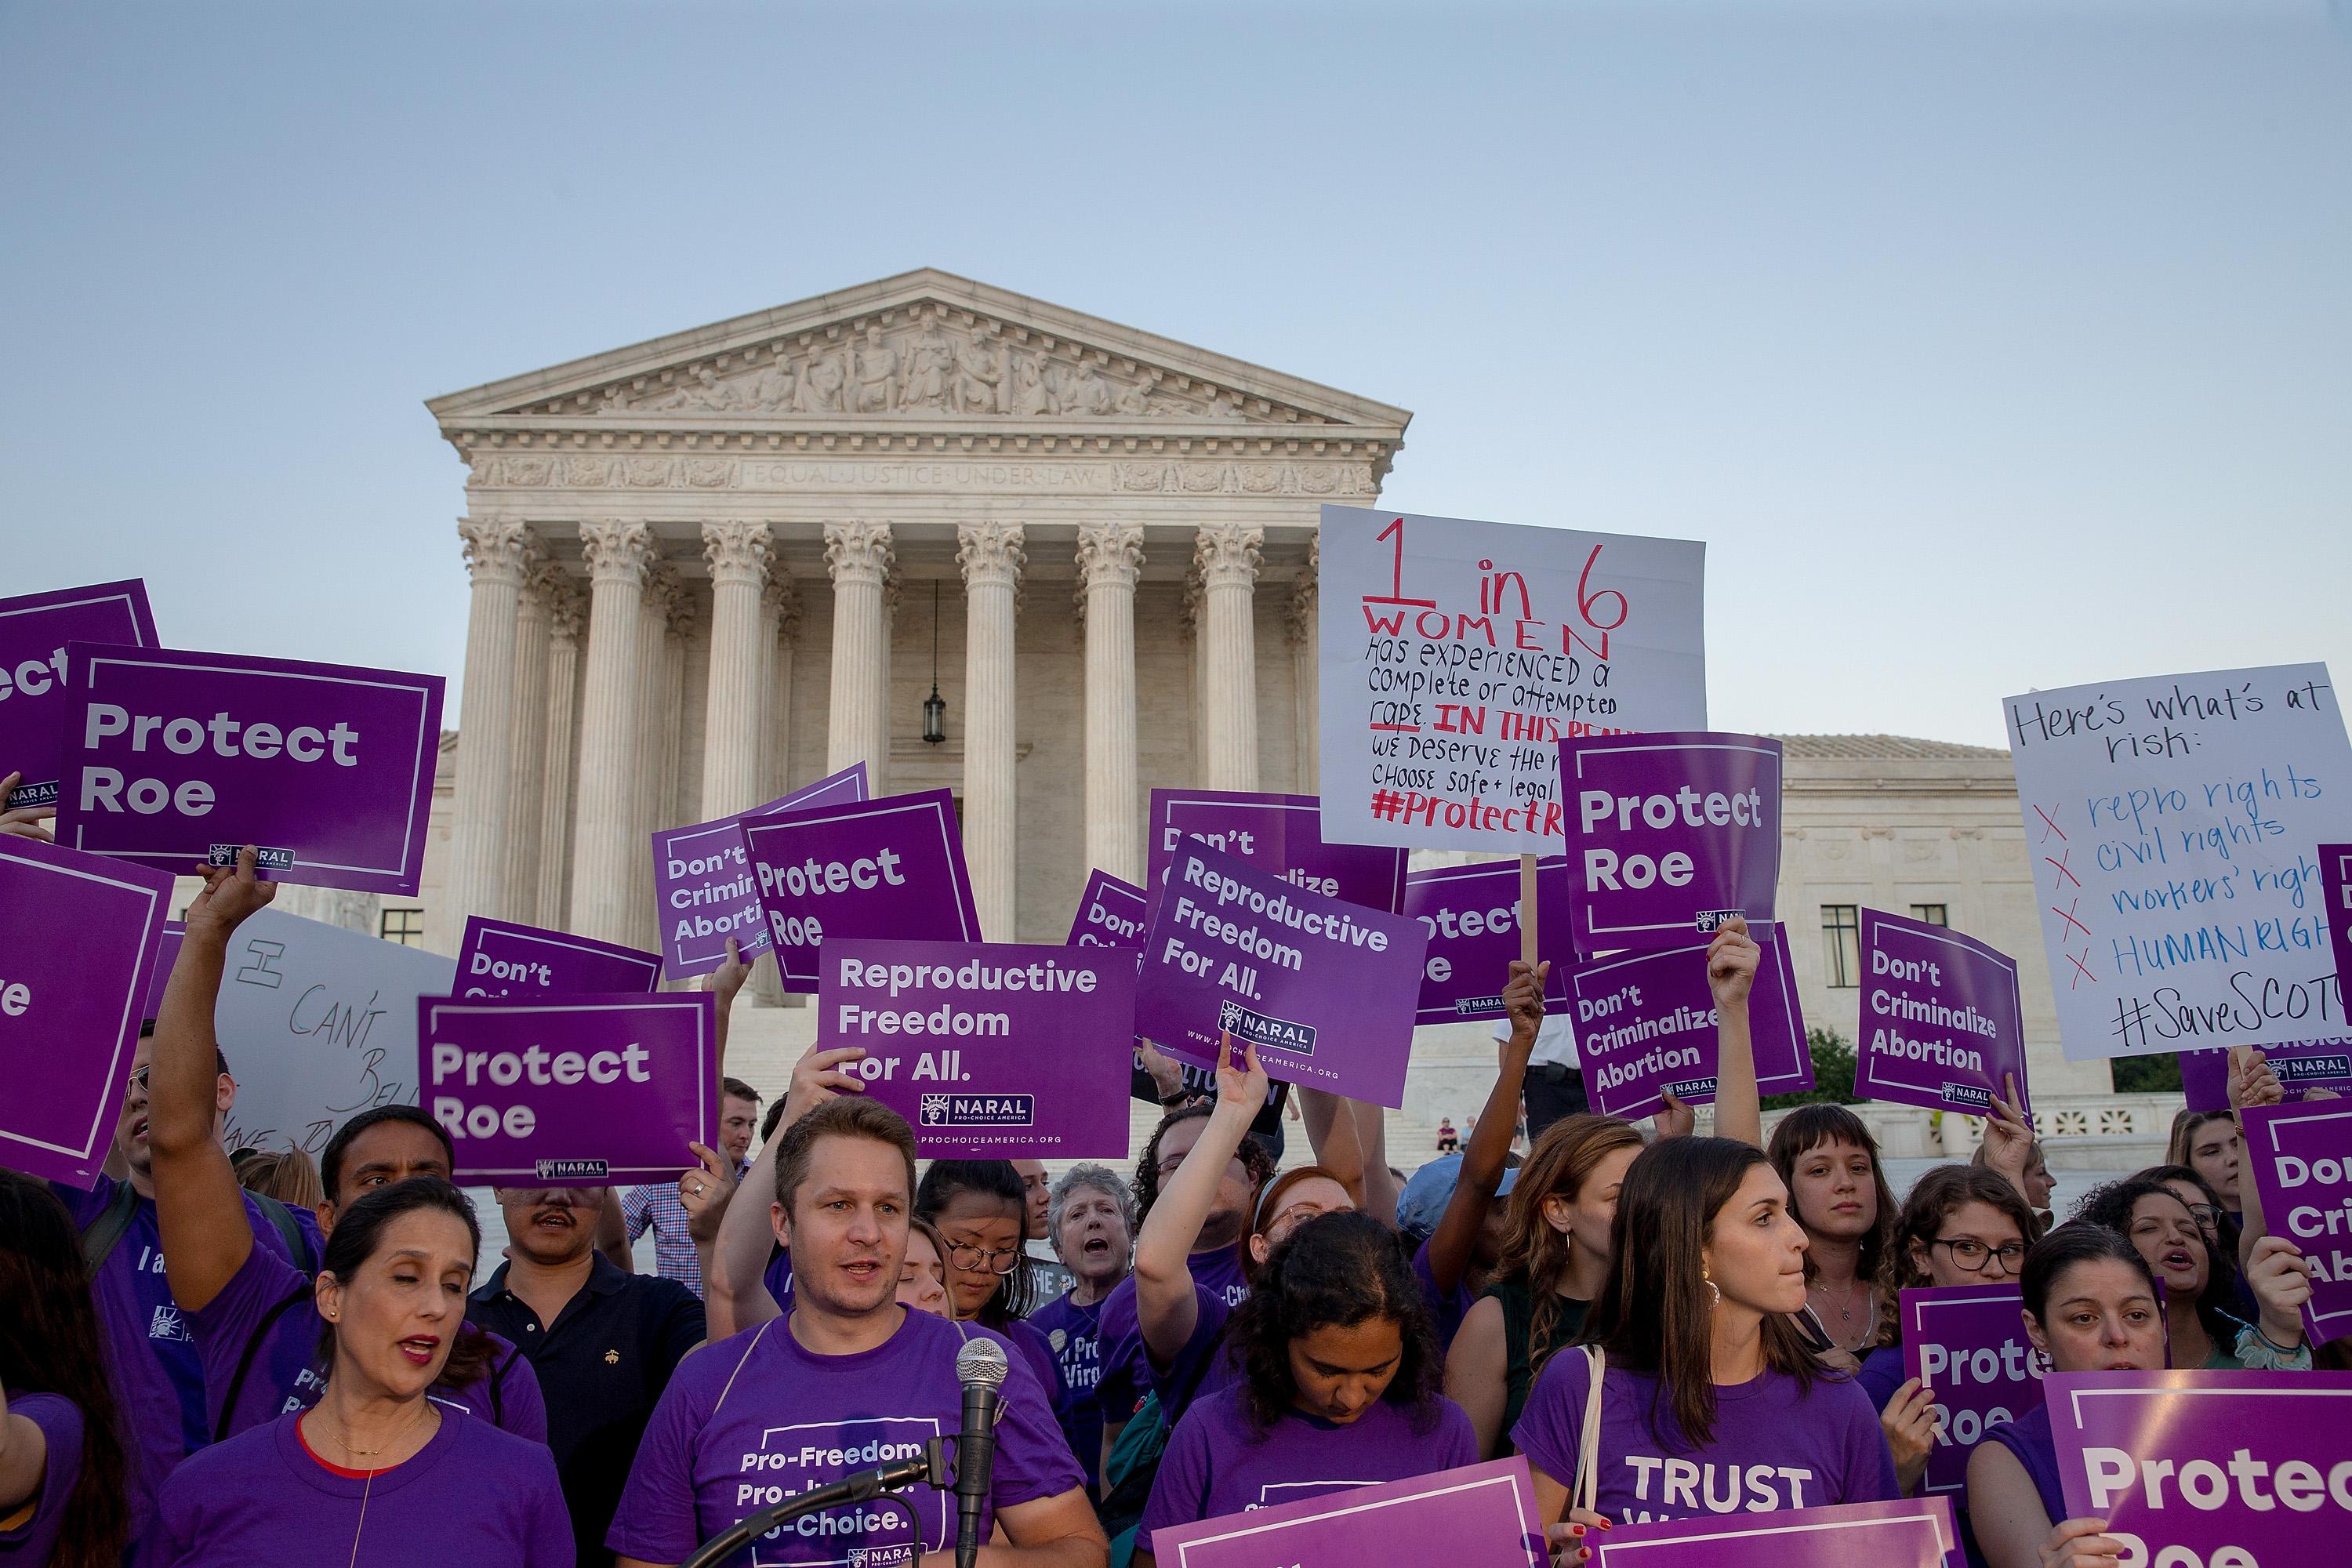 Pro-choice protesters demonstrate in front of the U.S. Supreme Court on July 9, 2018.